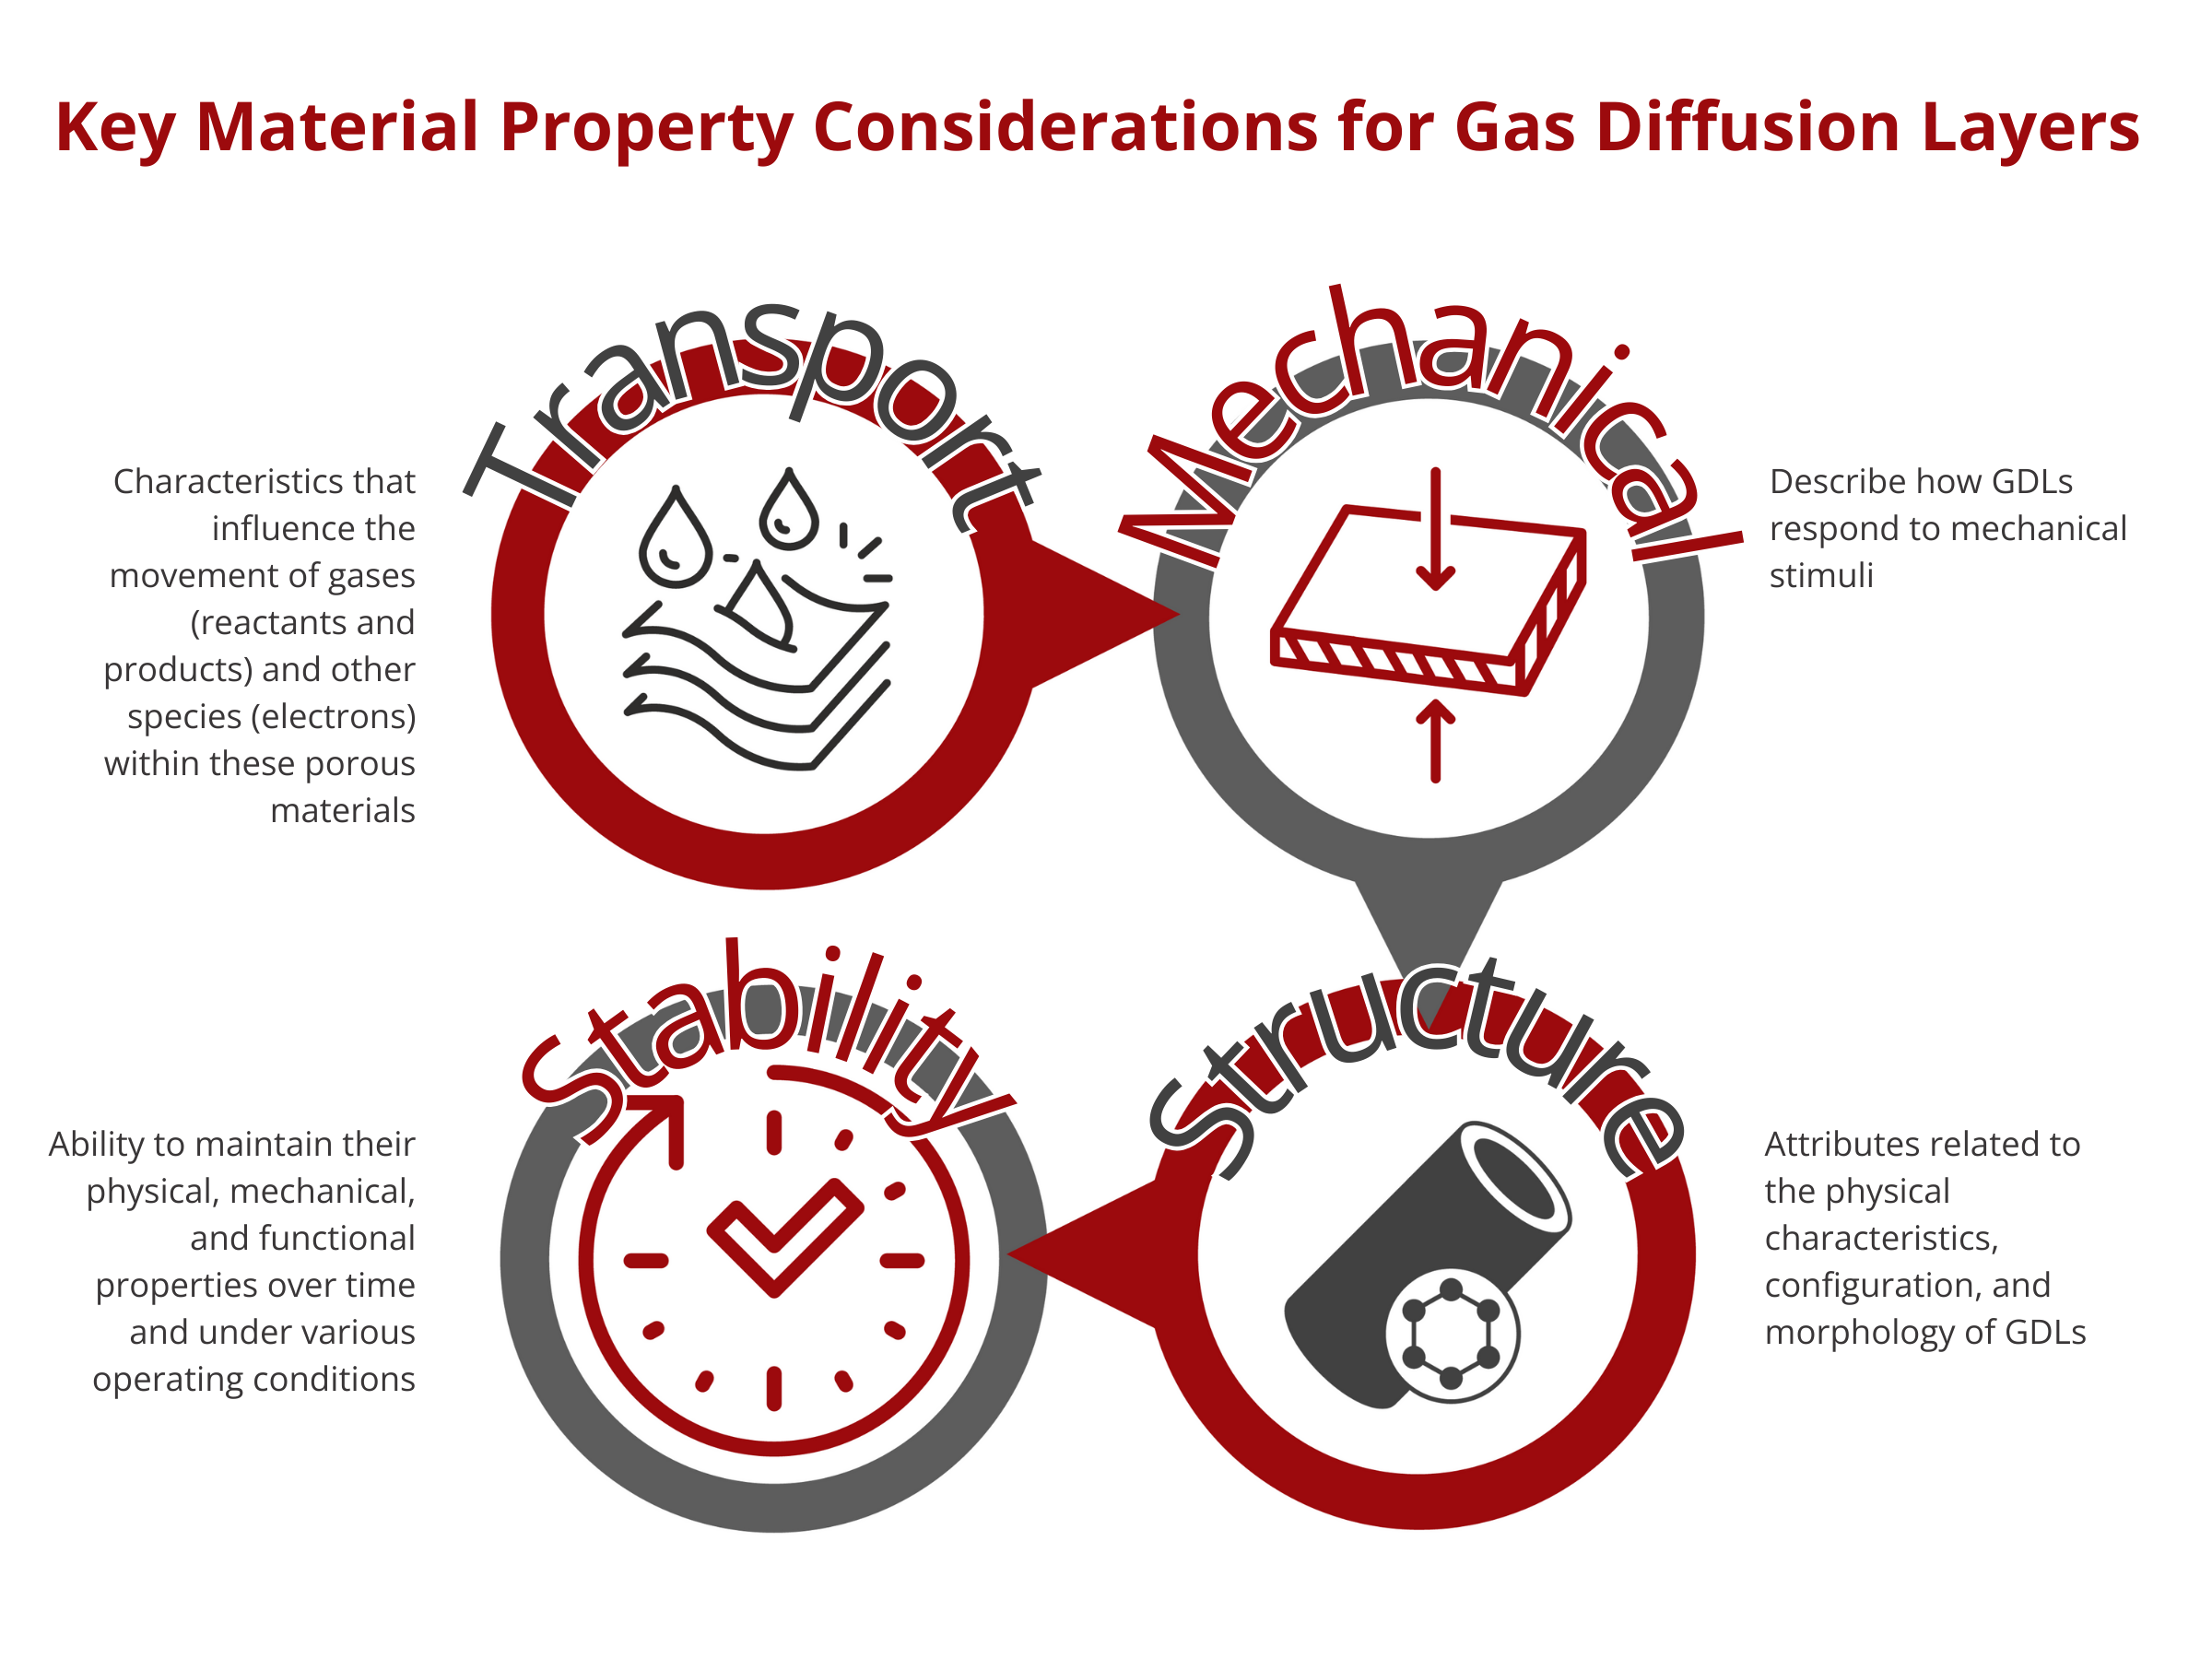 Key Material Property Considerations for Gas Diffusion Layers 